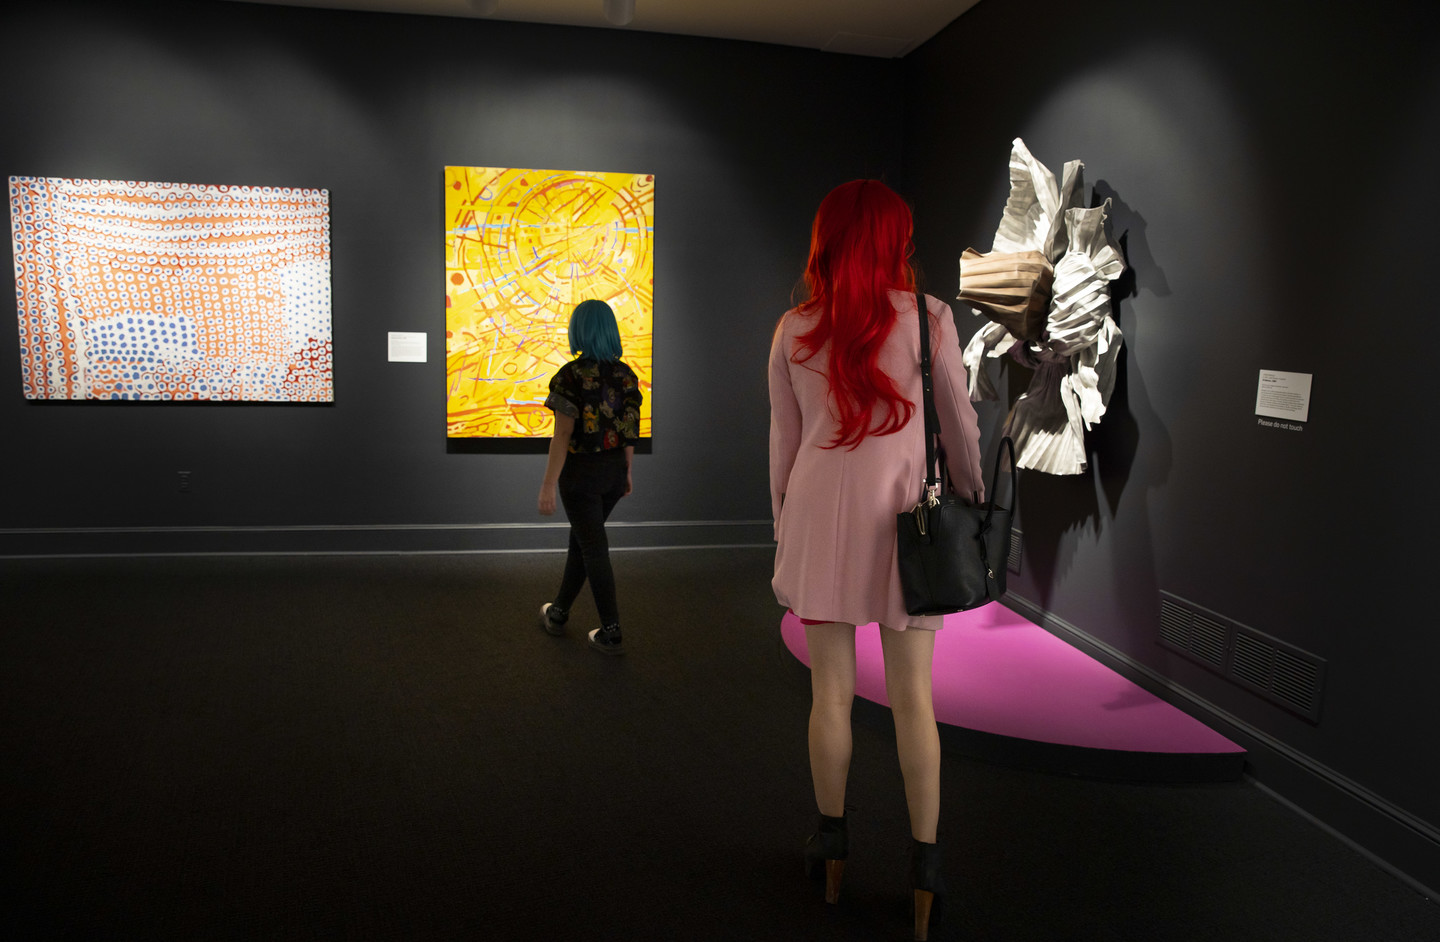 Corner gallery view of two visitors, one with long red hair and other with short blue-green hair looking at three artworks on dark walls.